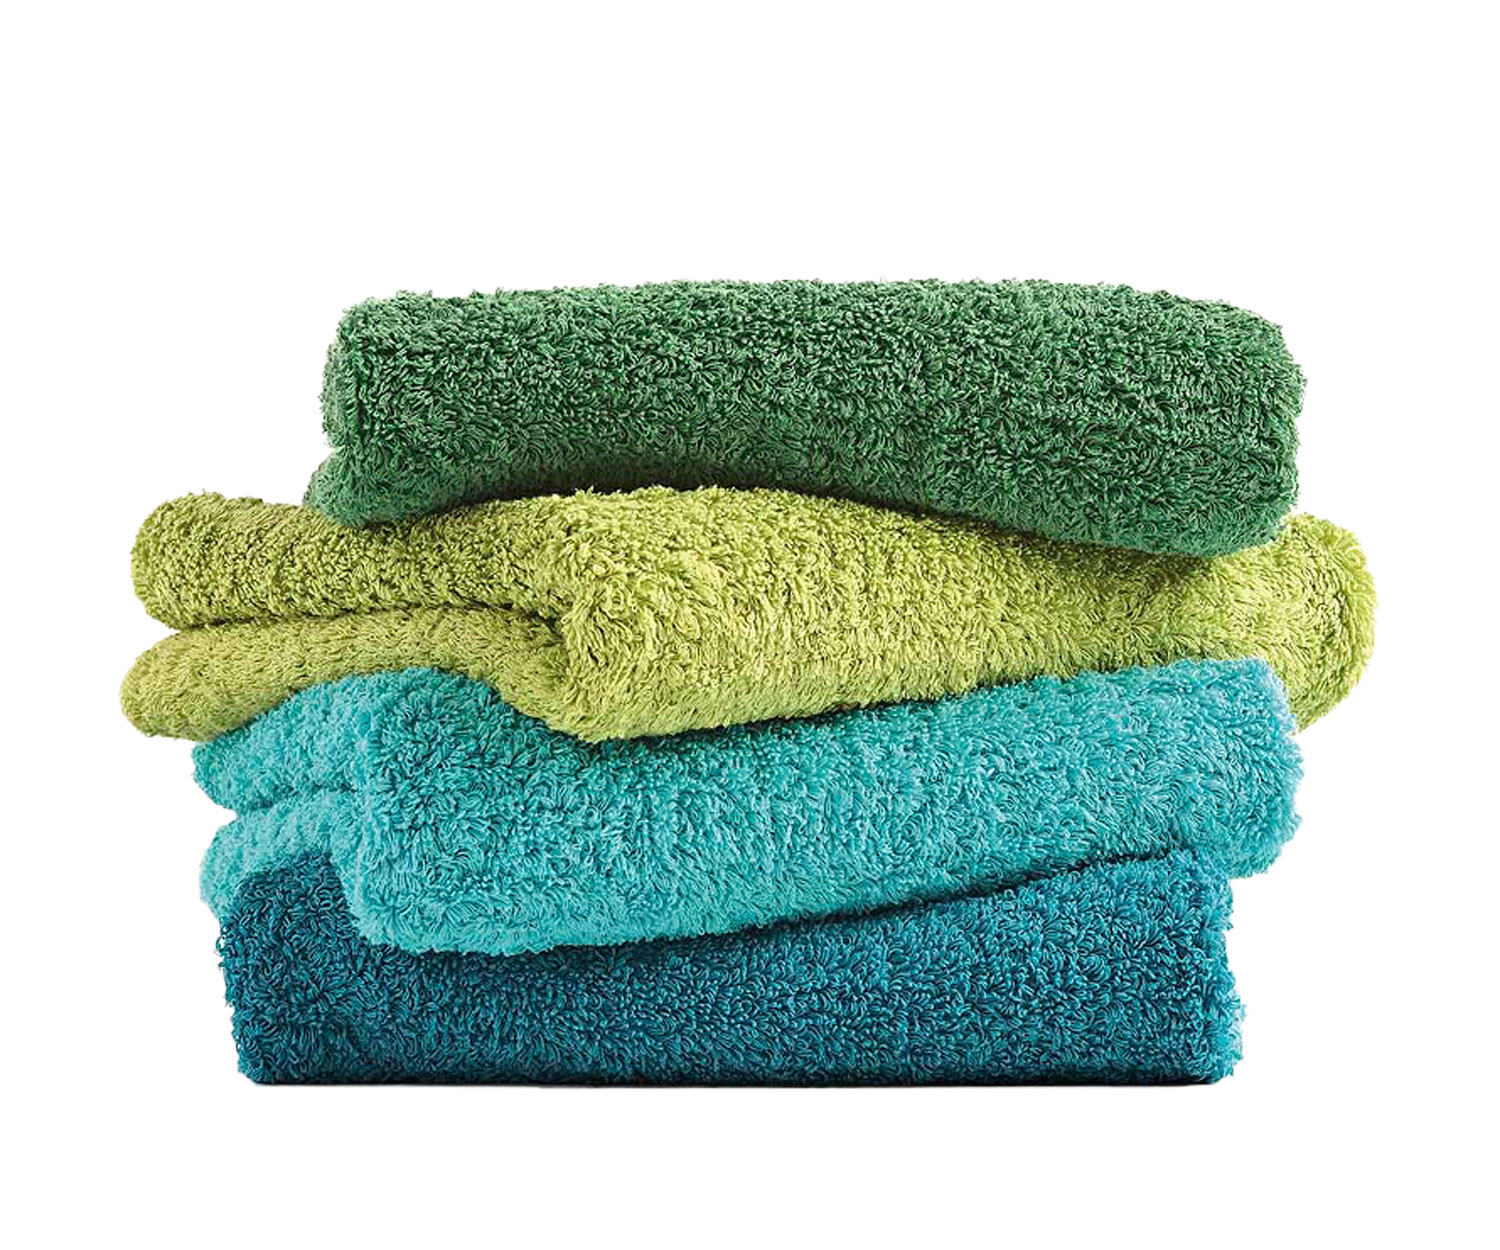 Abyss Double Bath Tub Mat - Lupin (430)